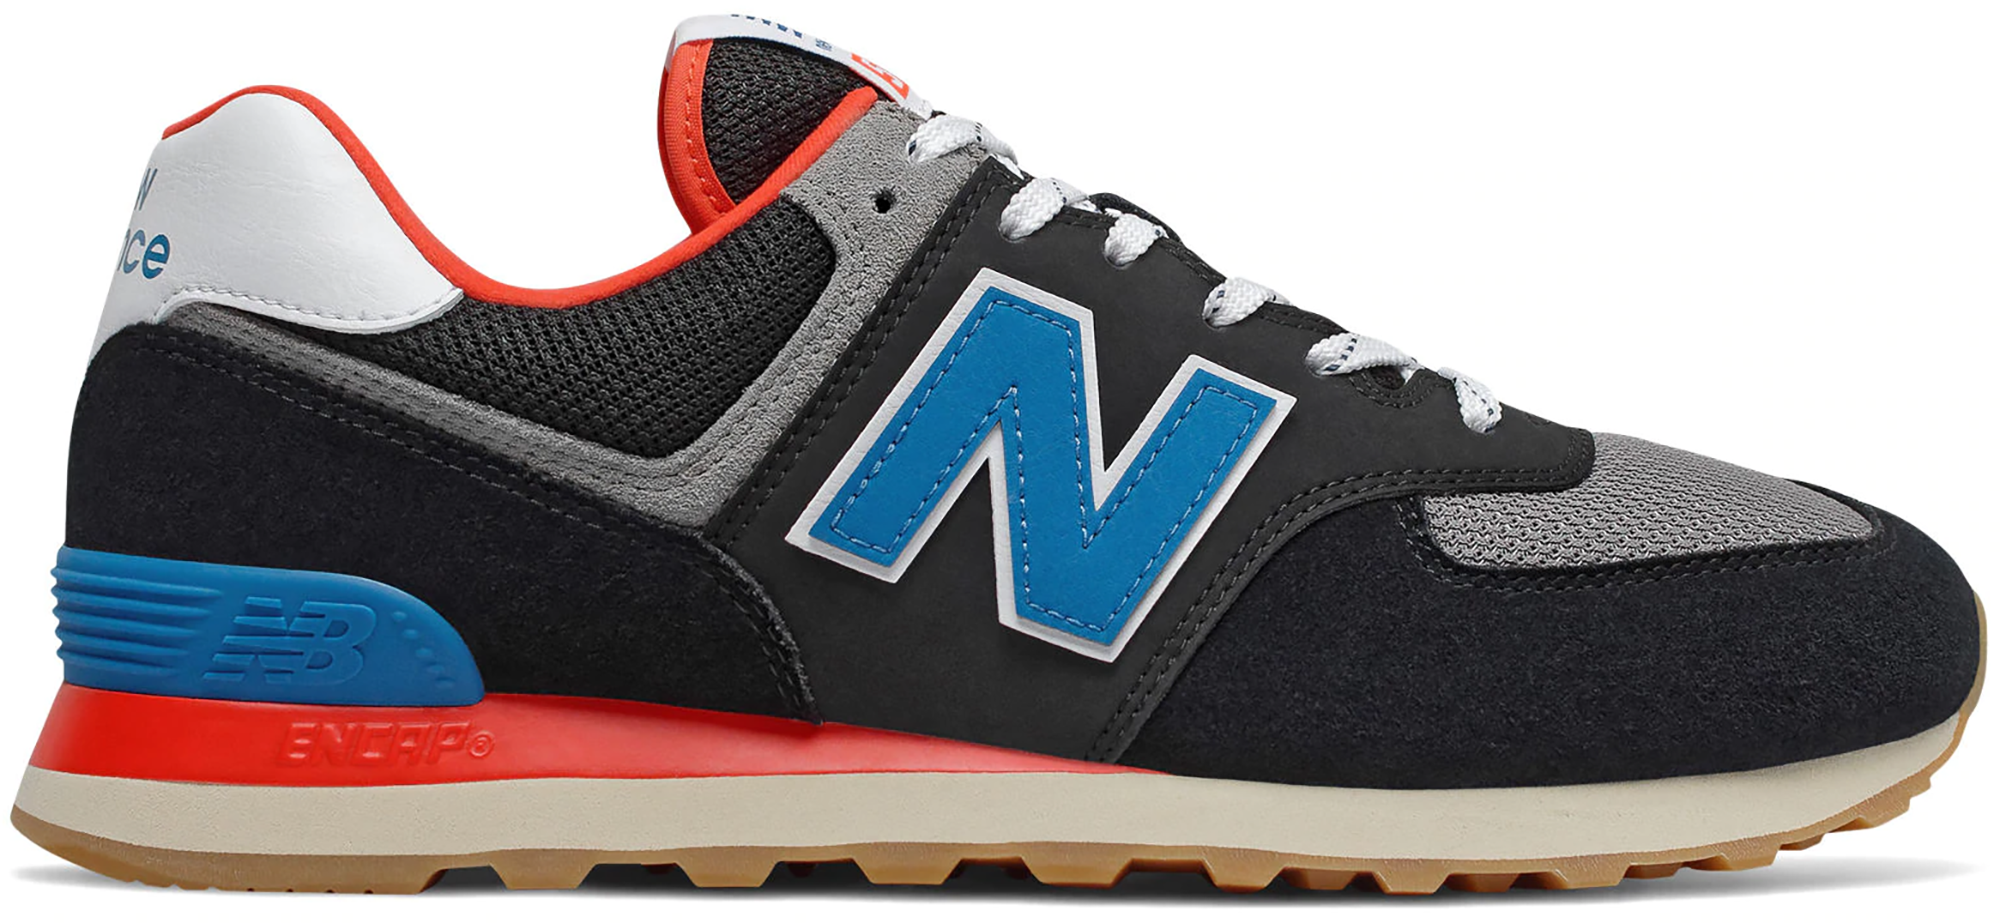 red and black new balance 574